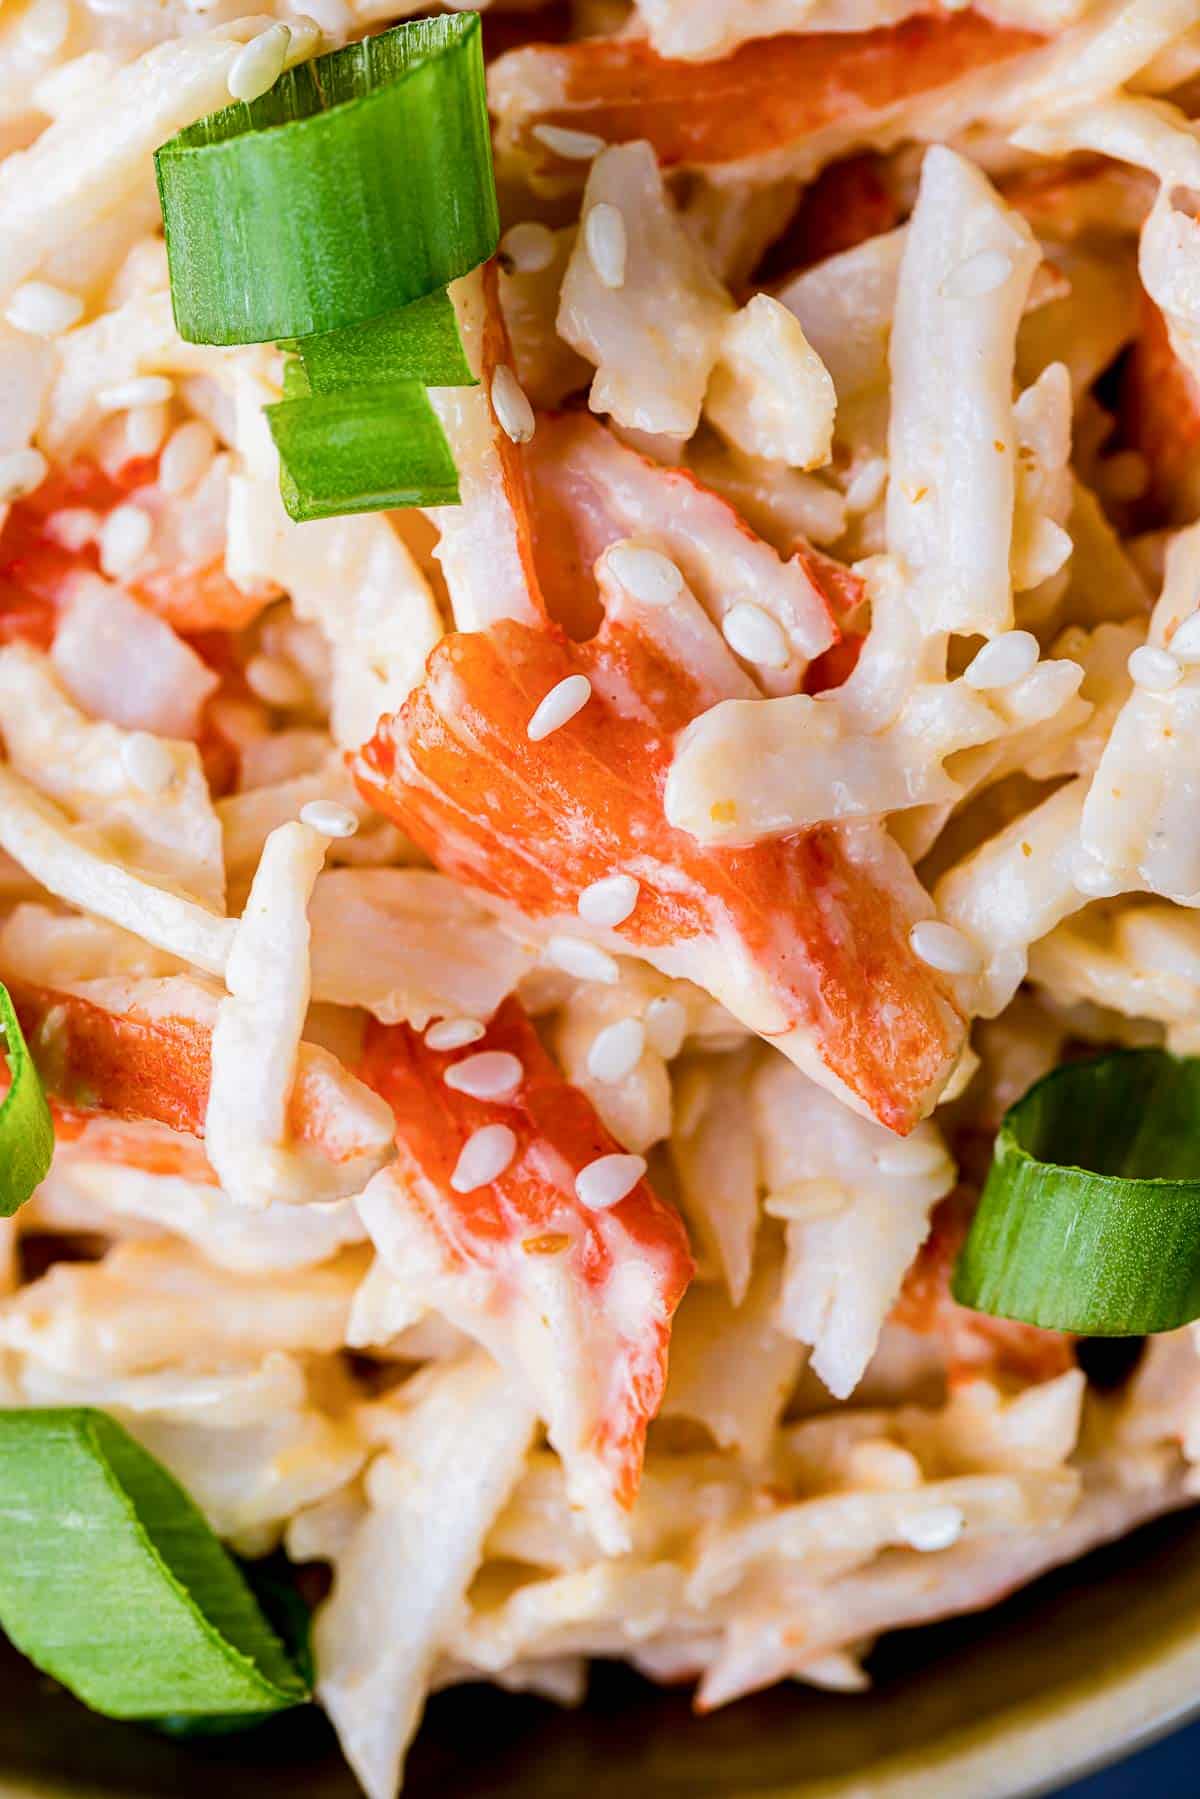 imitation crab meat pieces with sauce and green onions